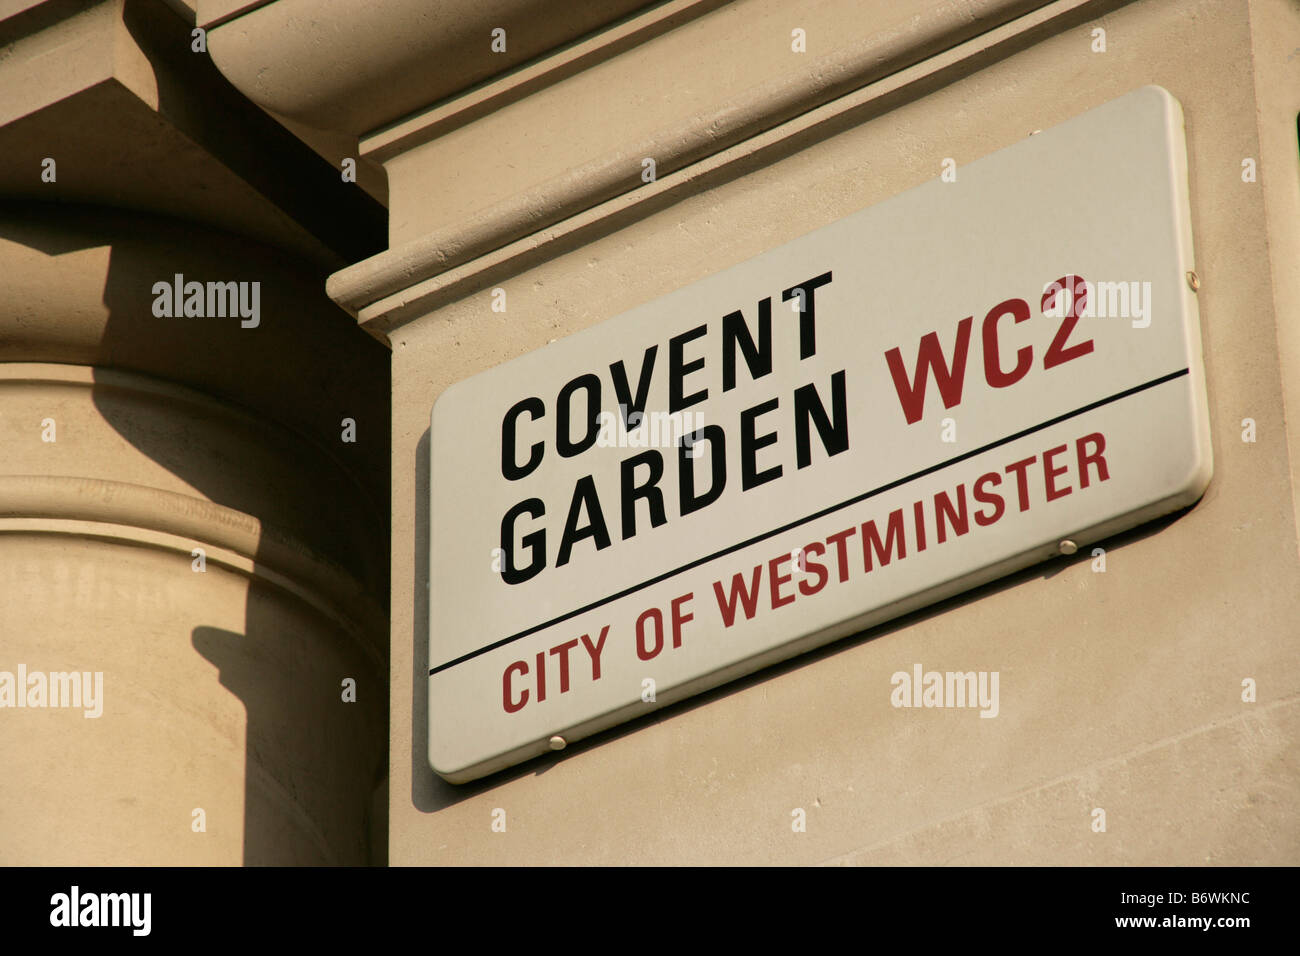 Covent Garden, WC2, London: street sign Stock Photo